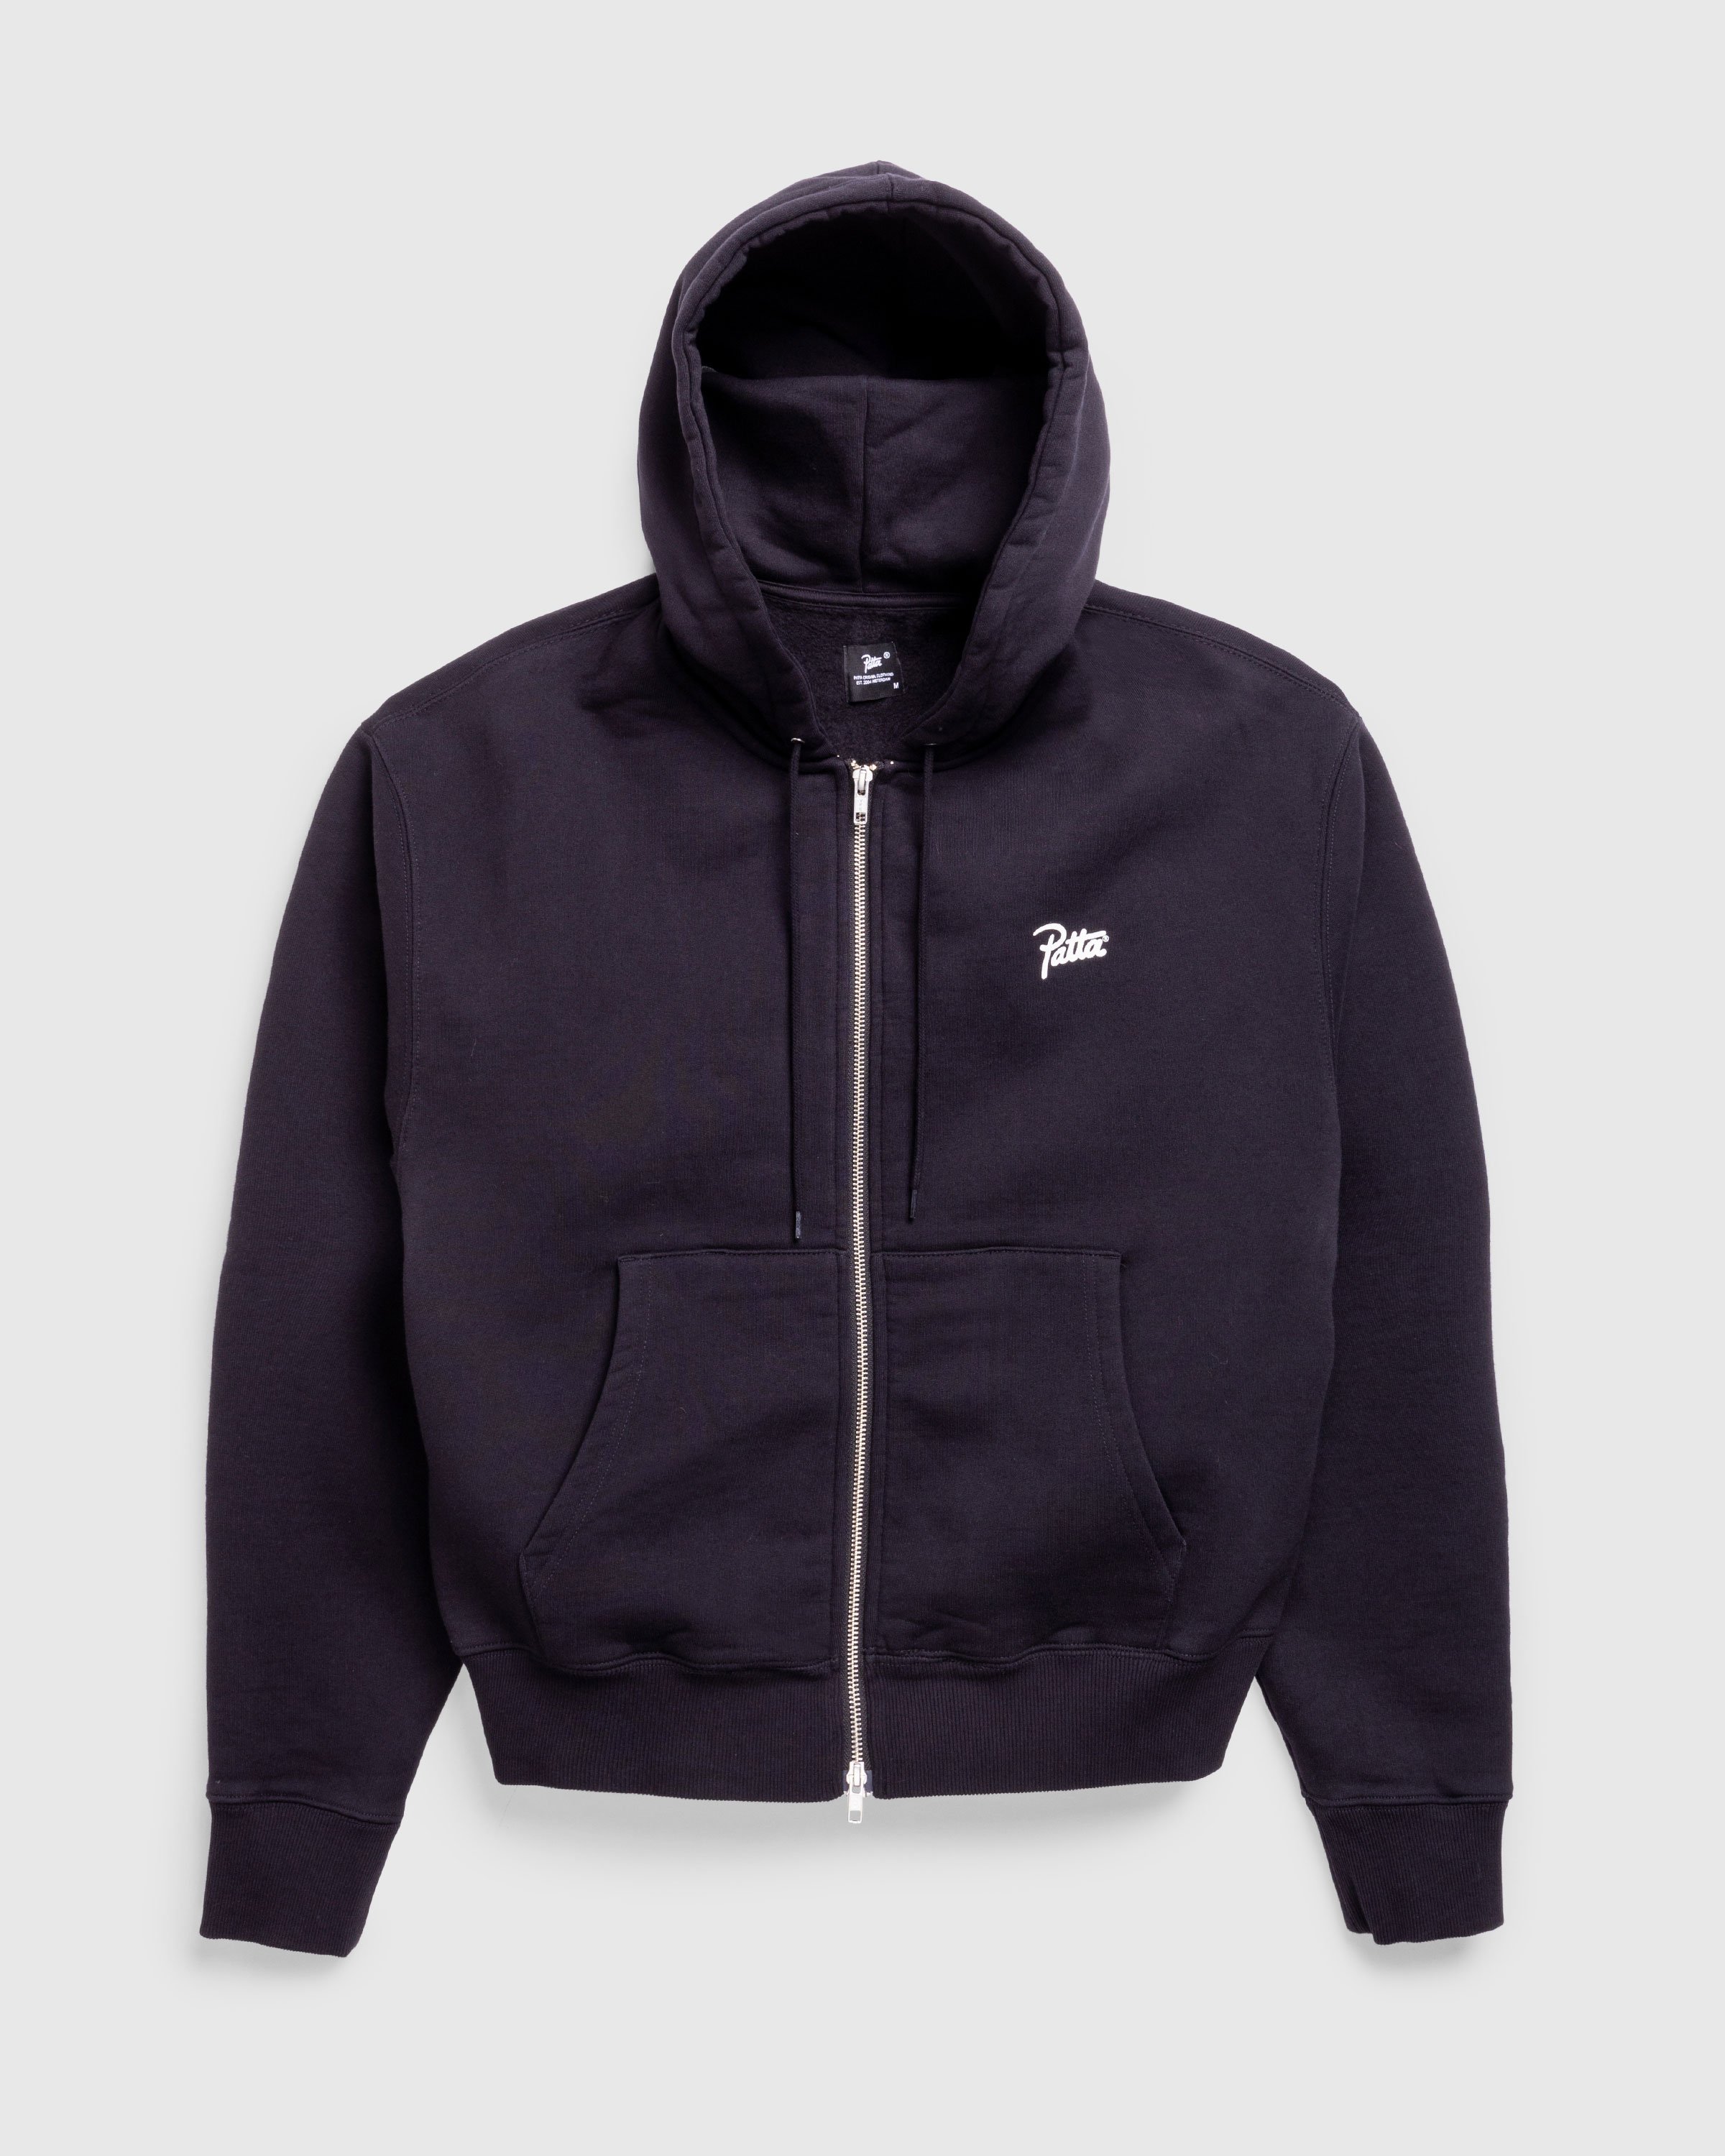 Patta - Classic Zip Up Hooded Sweater Black - Clothing - Black - Image 1